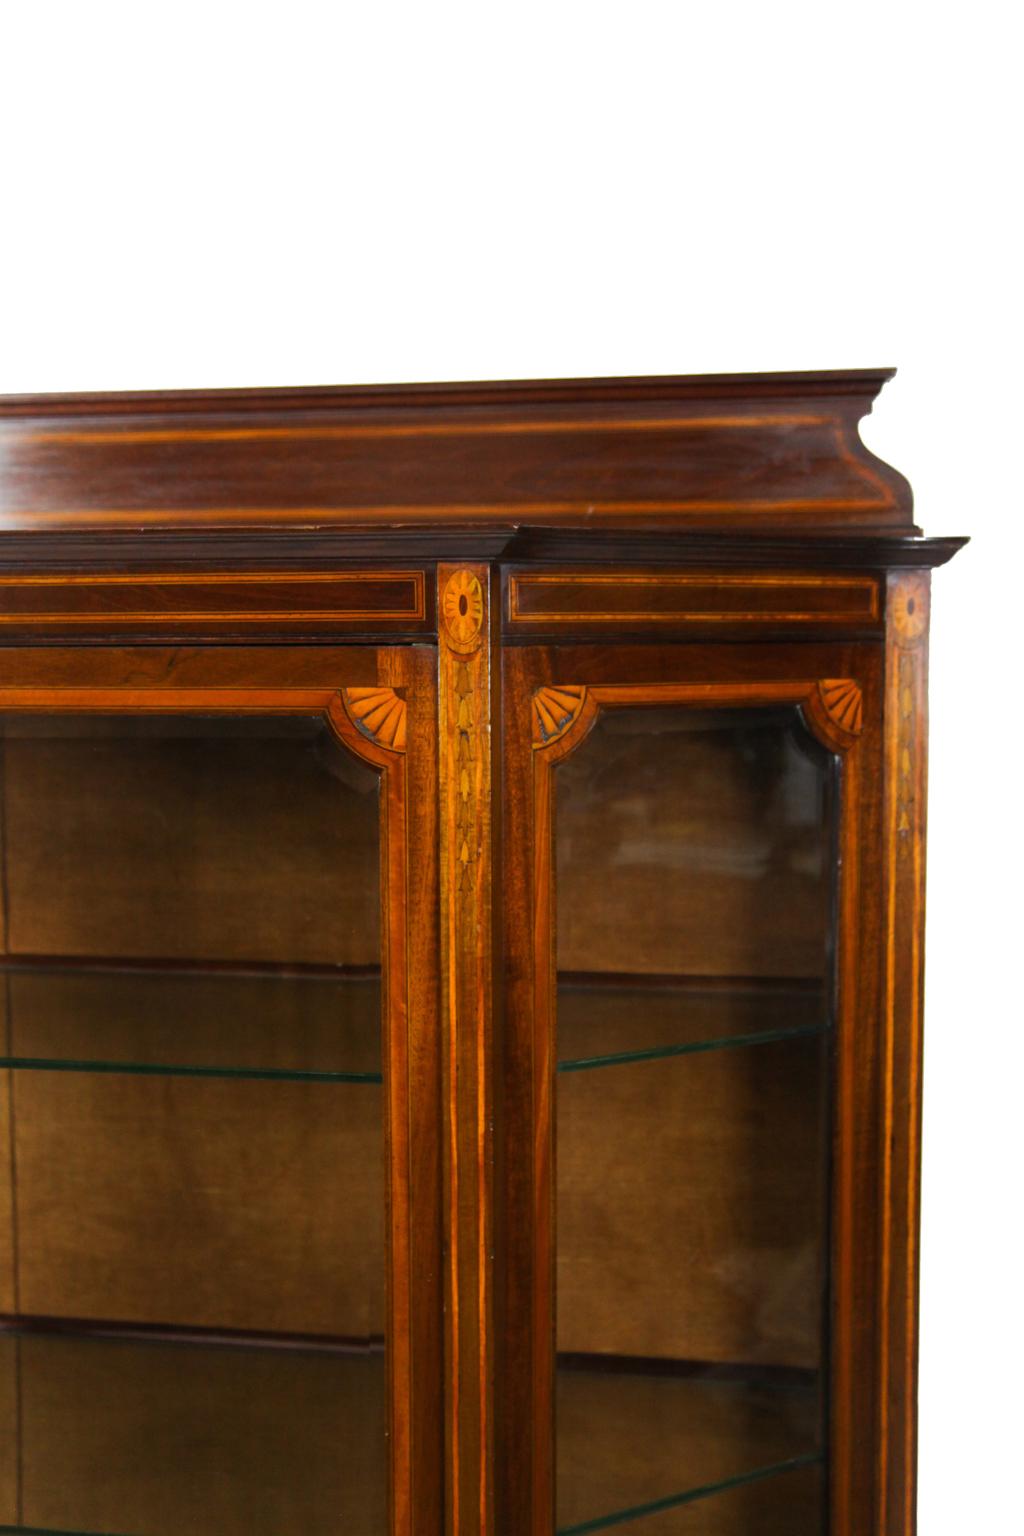 Inlaid Hepplewhite style display cabinet, intensely inlaid with bands in gallery, frieze, door and sides, stiles with inlaid medallions above bell flower motifs, beveled glass door and sides above lower shelf, interior with glass shelves and